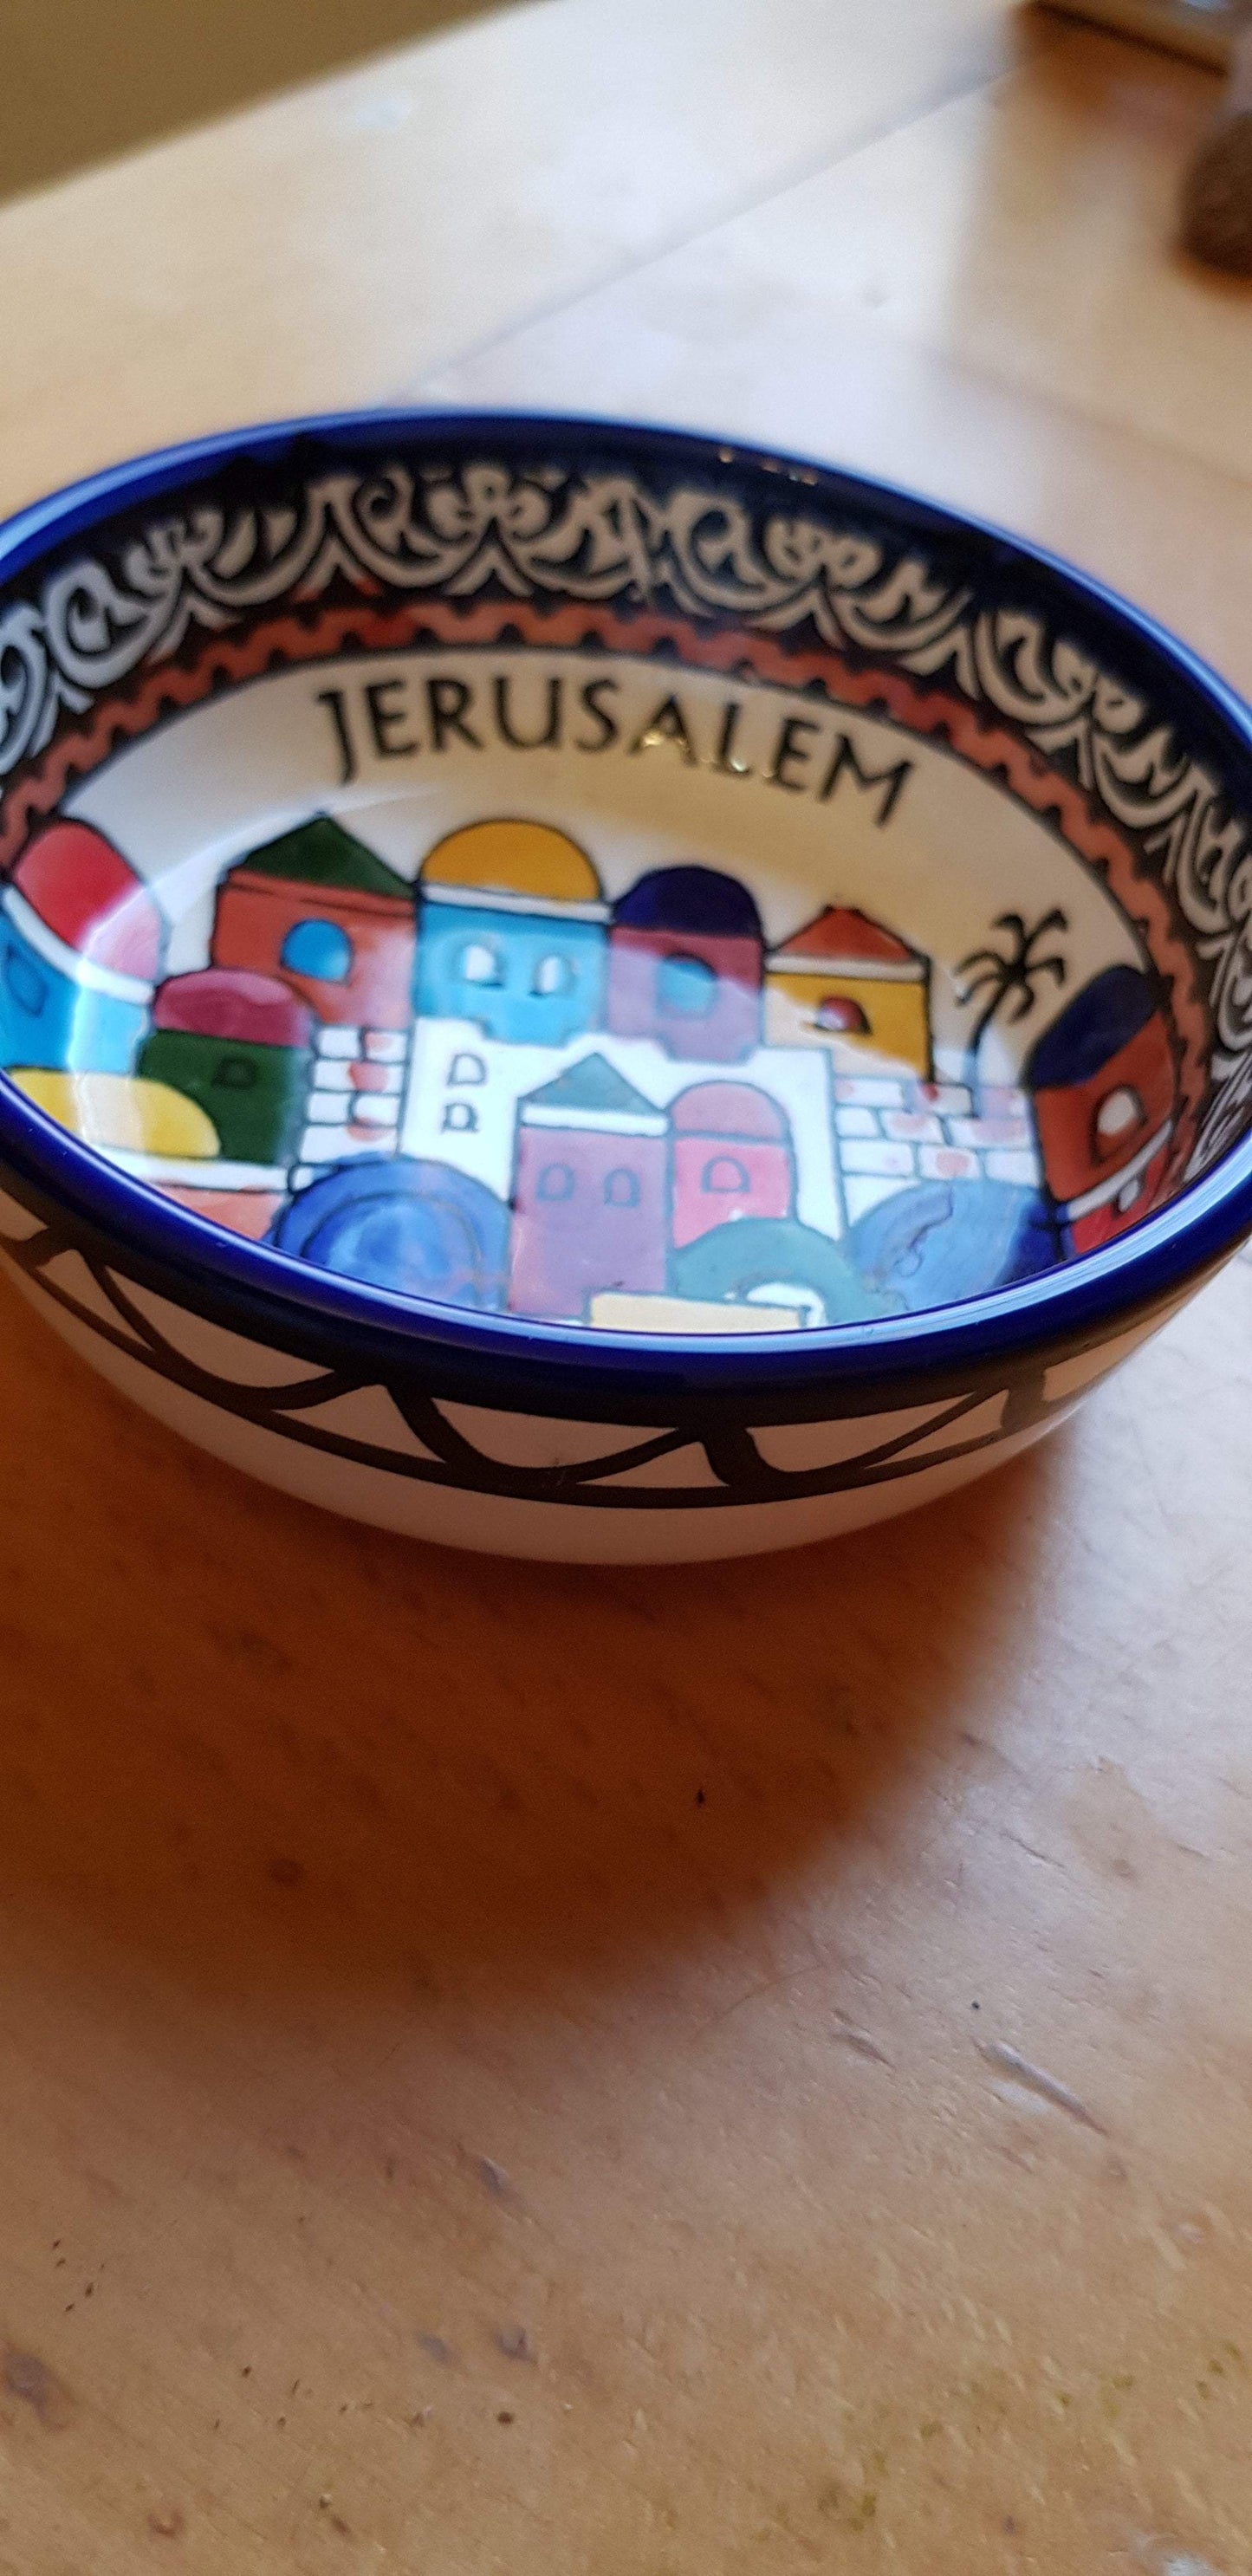 Bluenoemi Jewelry bowl 14 / colourful Gift for Home Armenian Ceramic Bowl for serving or decoration. Holy Land Jerusalem motif.